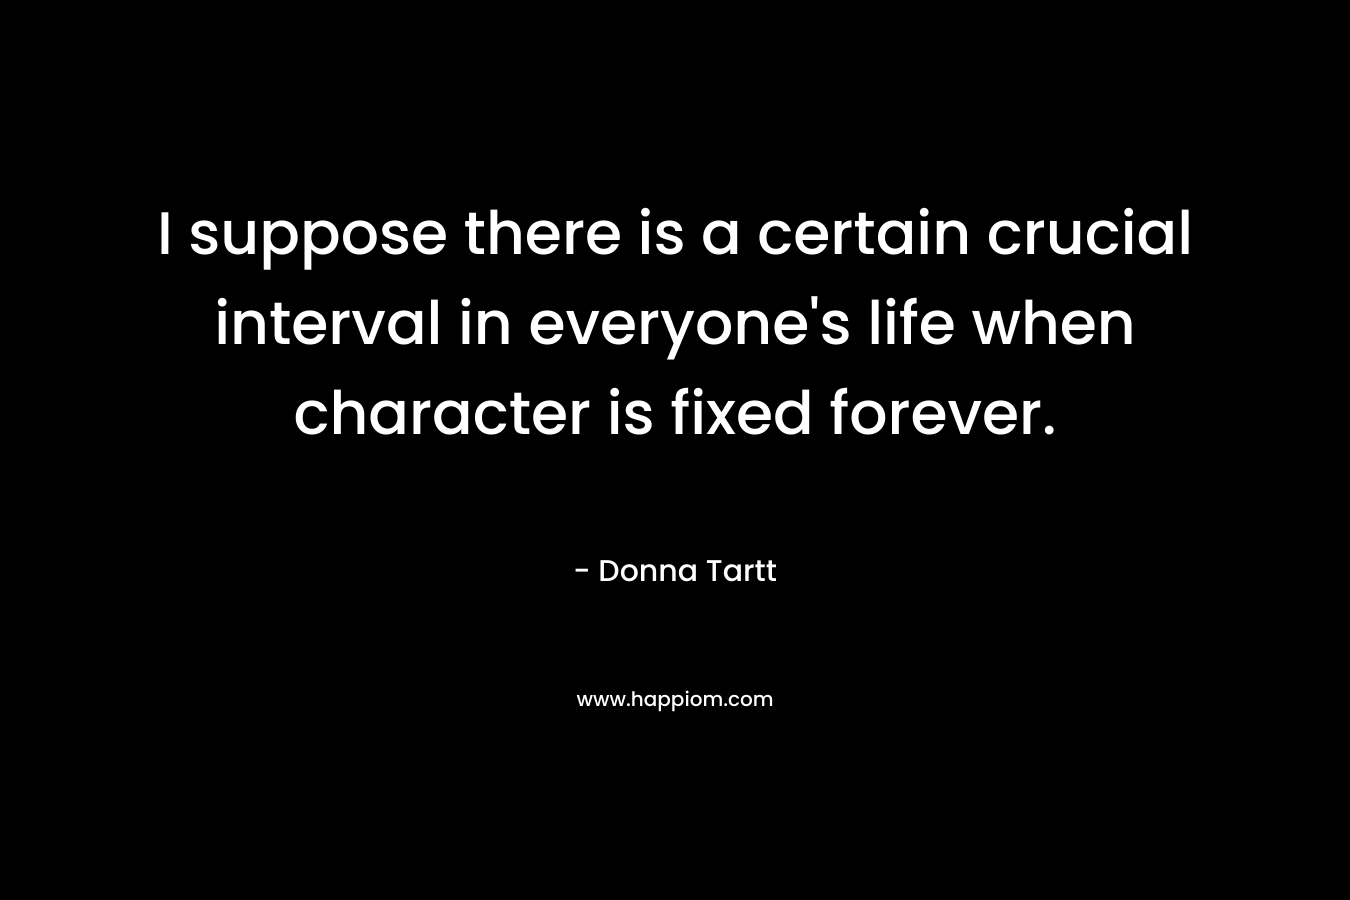 I suppose there is a certain crucial interval in everyone's life when character is fixed forever.